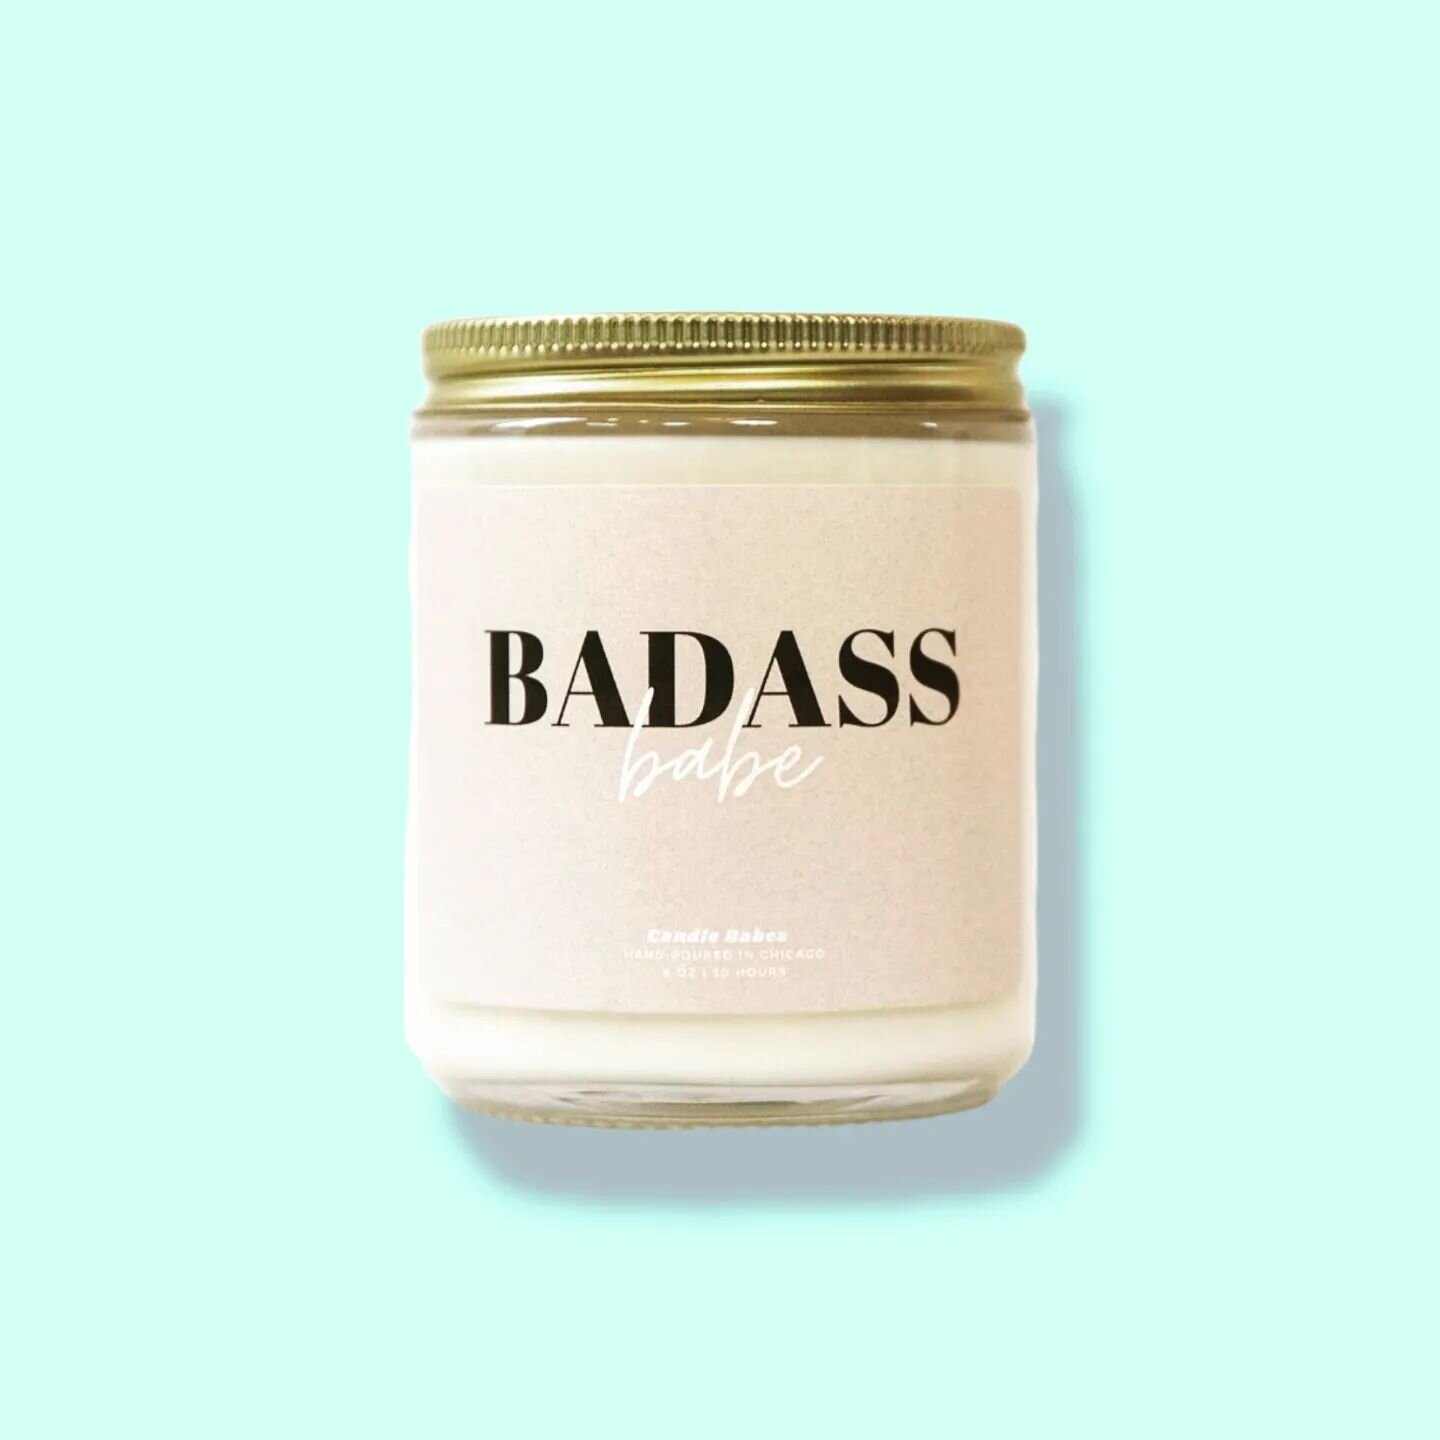 I bet you know one ! 
💙💙💜💙💙
#badassbaby #baby #candles #soywaxcandles #handmade #giftshop #chicago #modernartisanboutique #artisanboutique #bestpresent #badassbabyclub